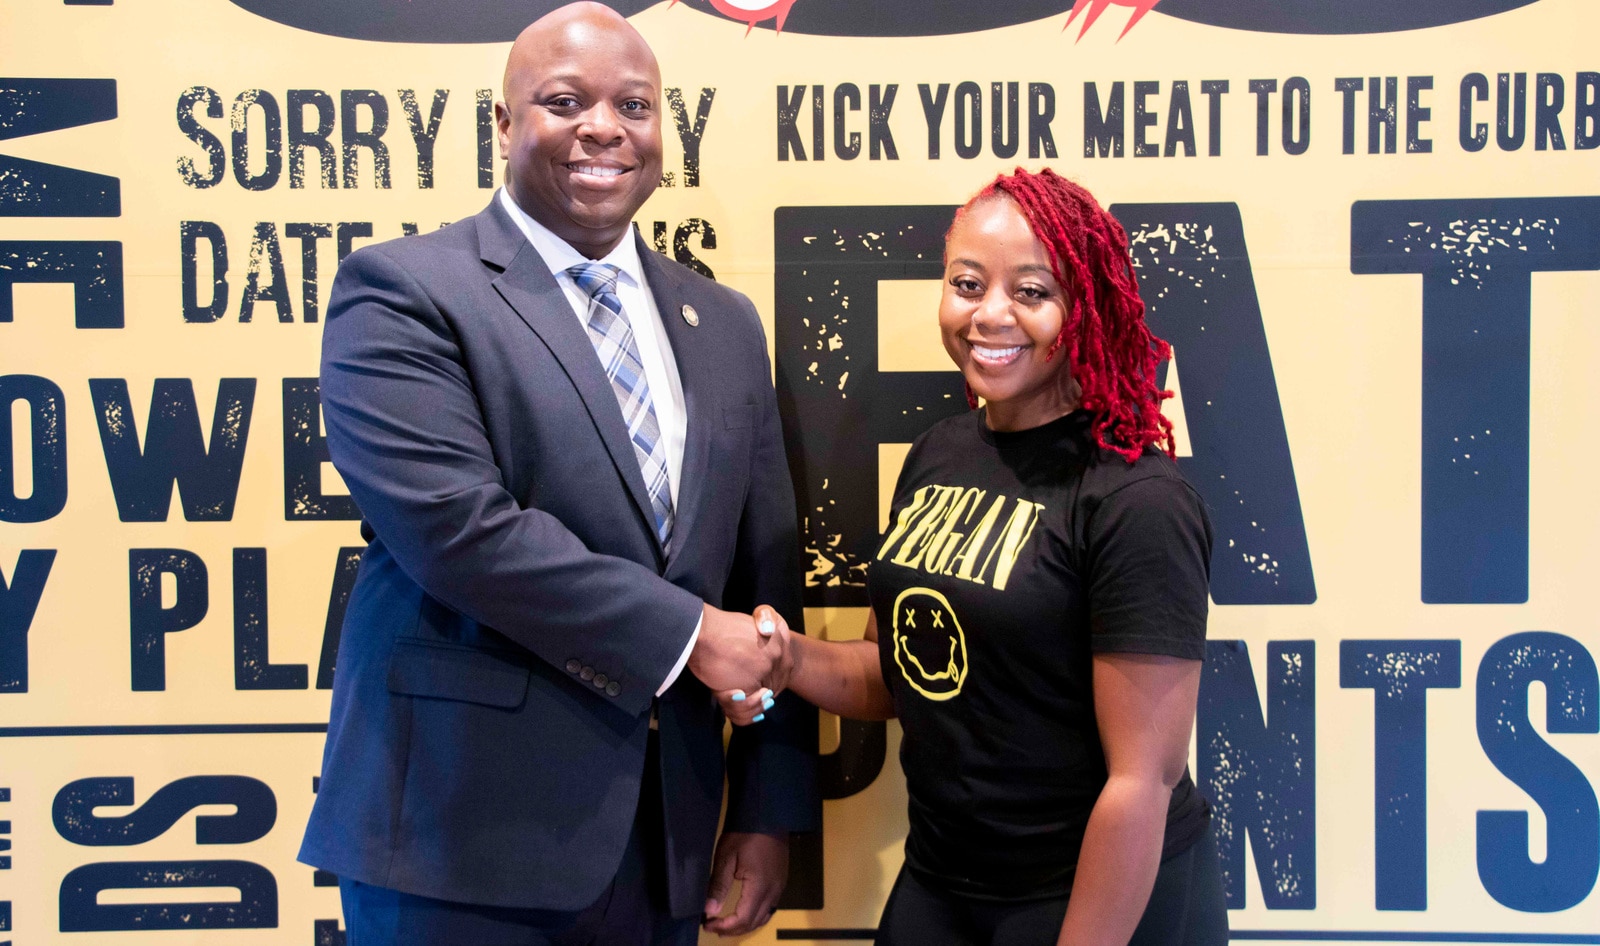 Slutty Vegan’s Pinky Cole Is Giving $10,000 Scholarships and Jobs to Formerly Incarcerated Youth&nbsp;